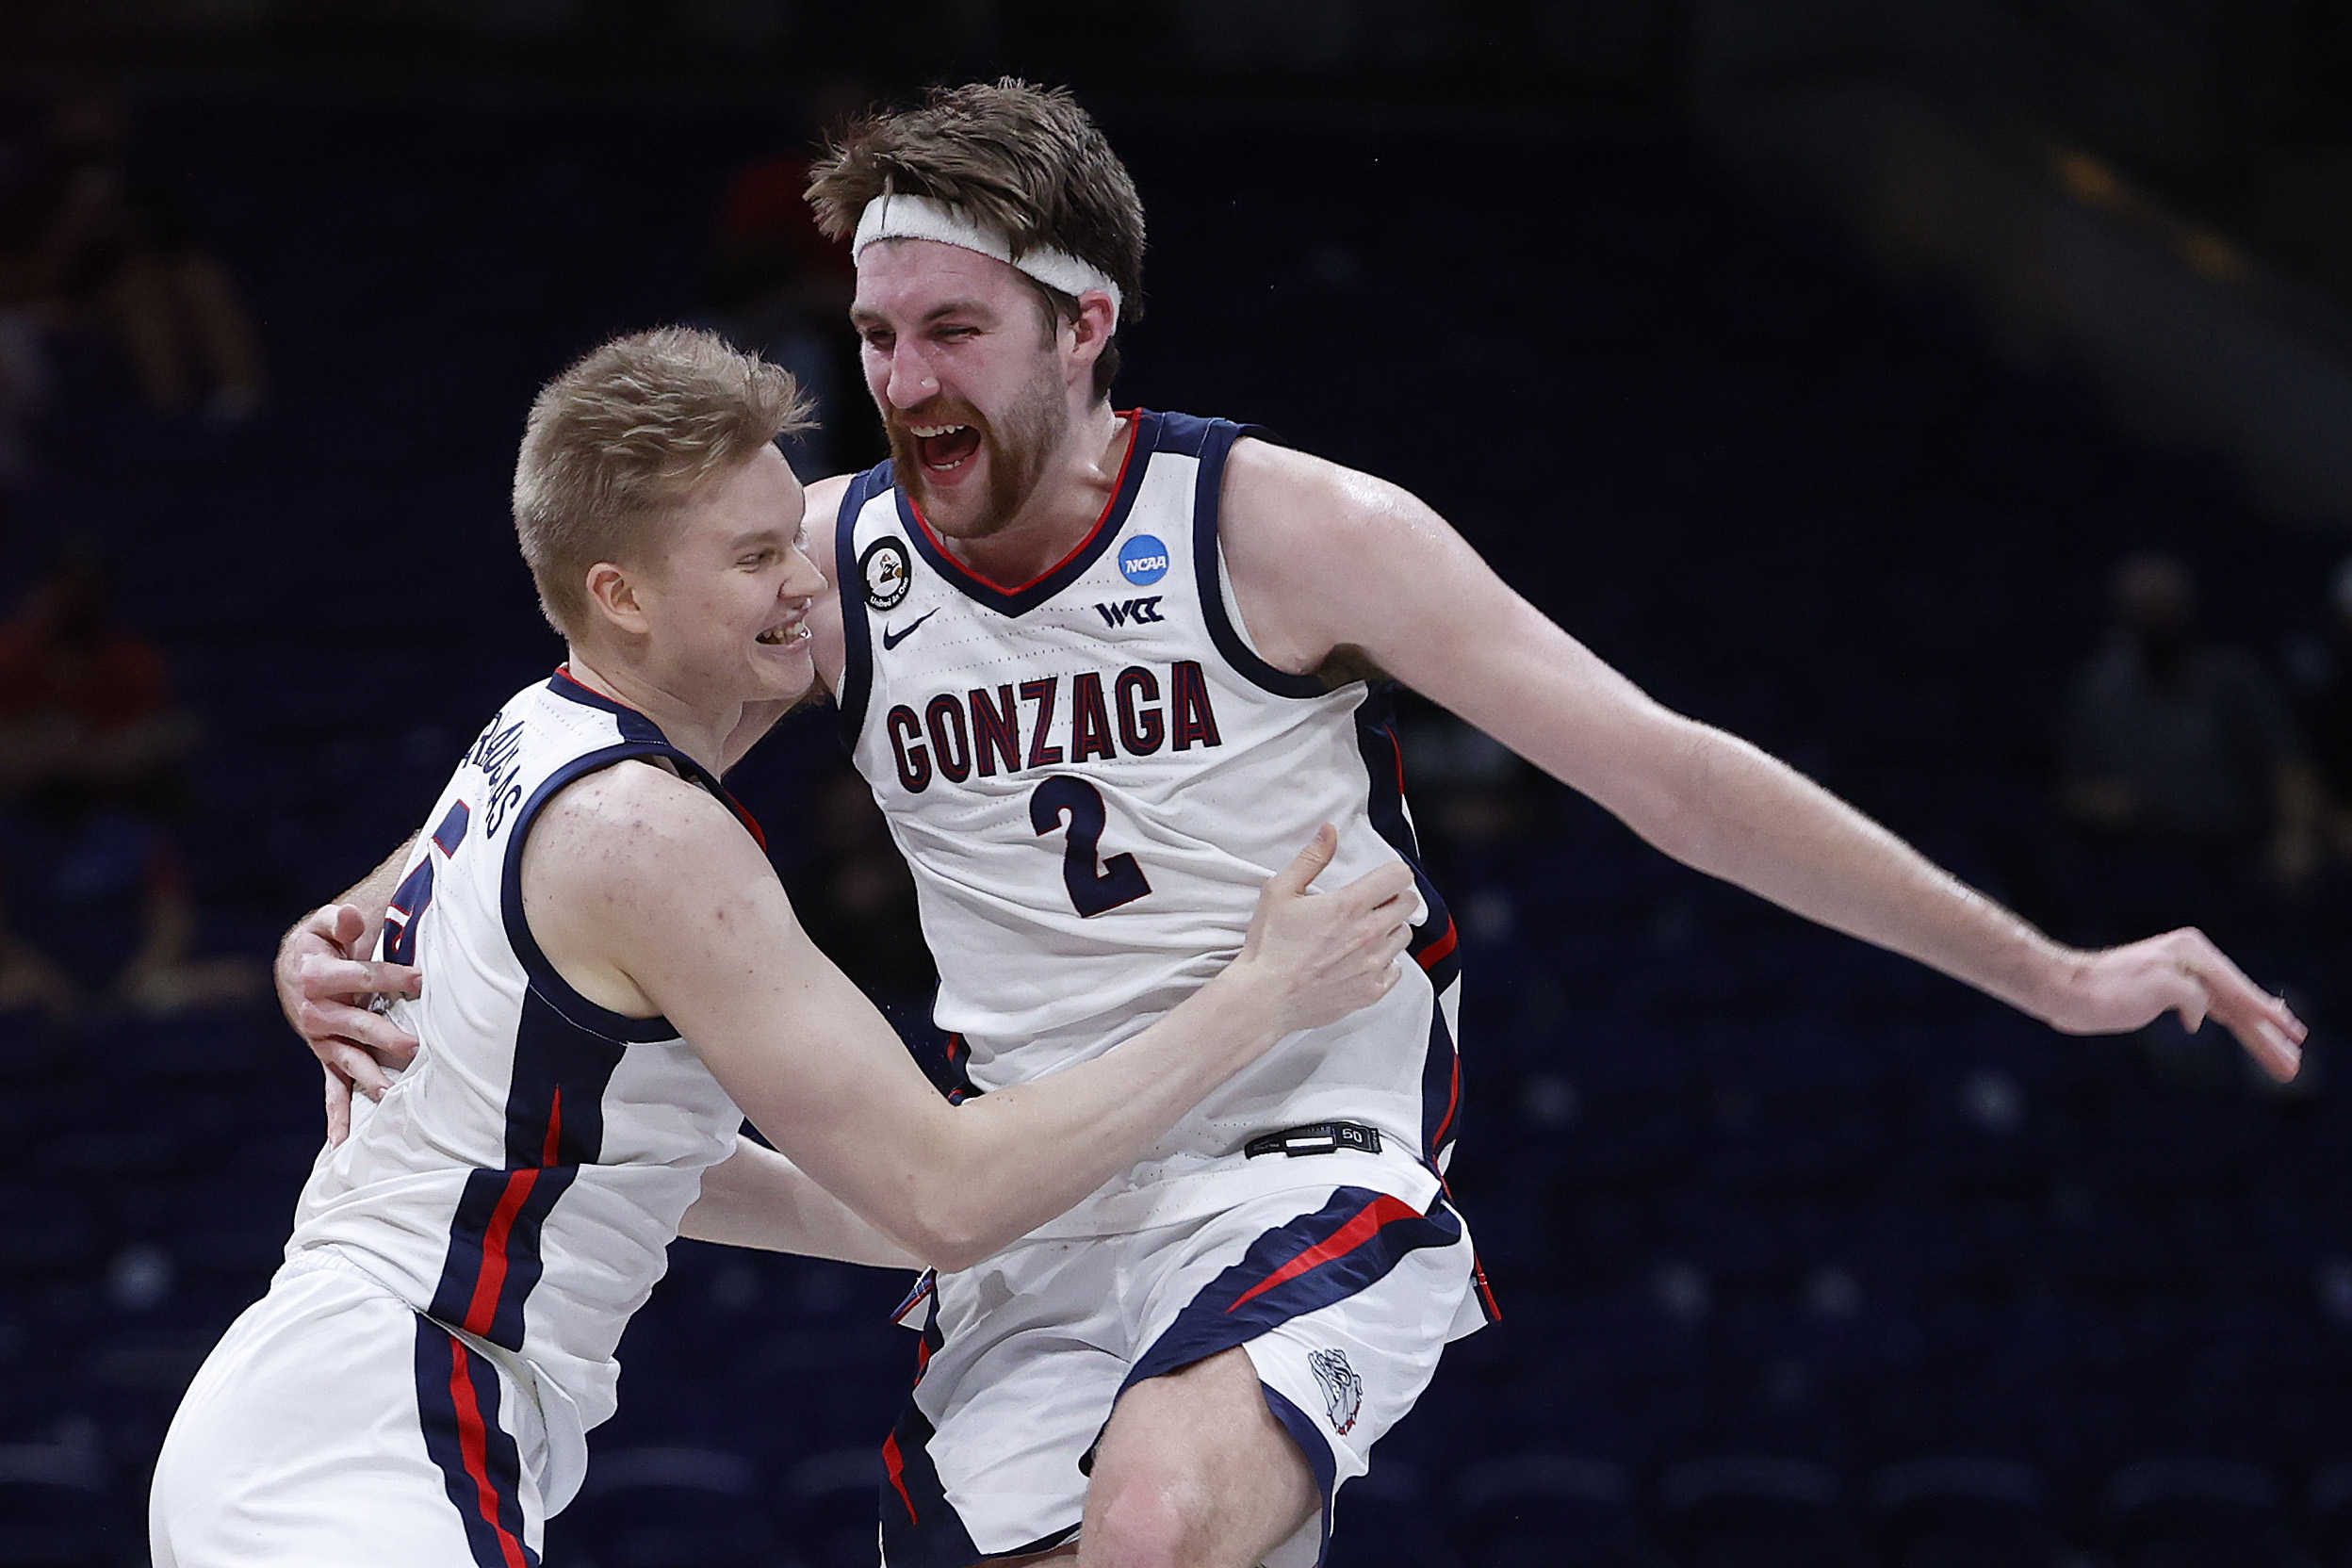 Gonzaga stays undefeated with 85-66 win over USC - The ...